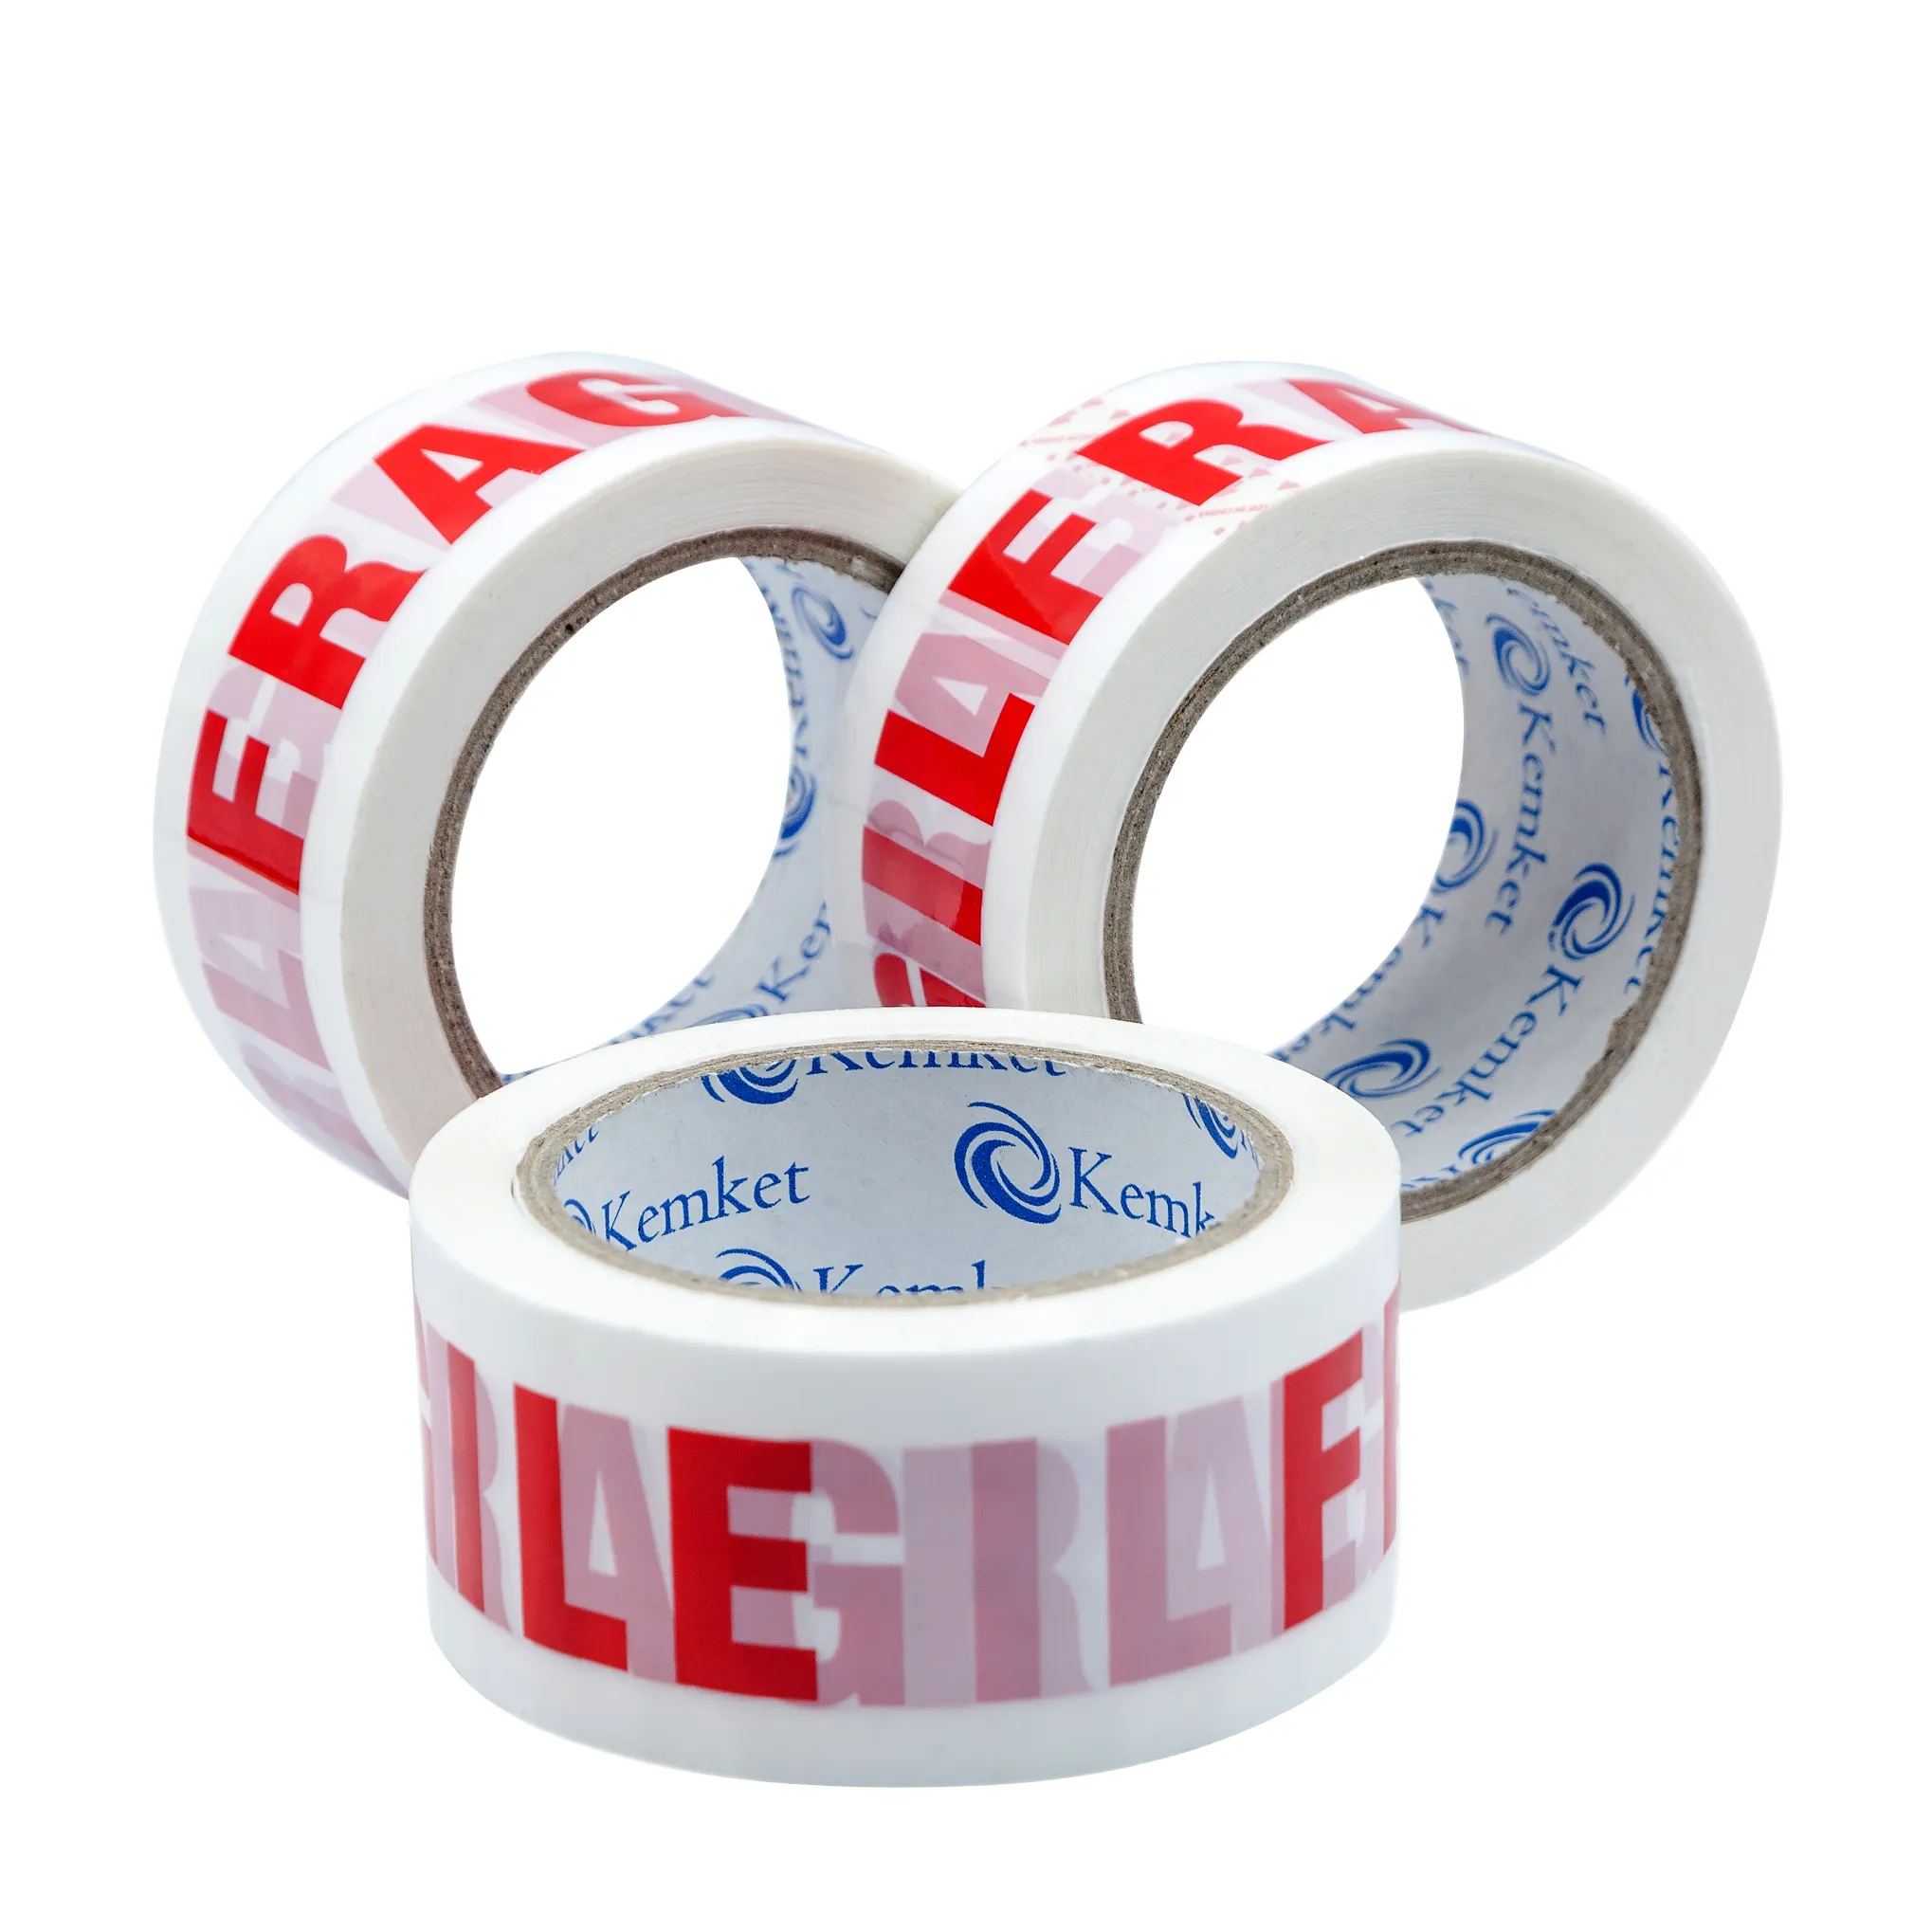 Fragile Tape Handle with Care Packing Printing Tape, Shipping Carton Box Sealing Tape 2 Inch for Box Office Moving